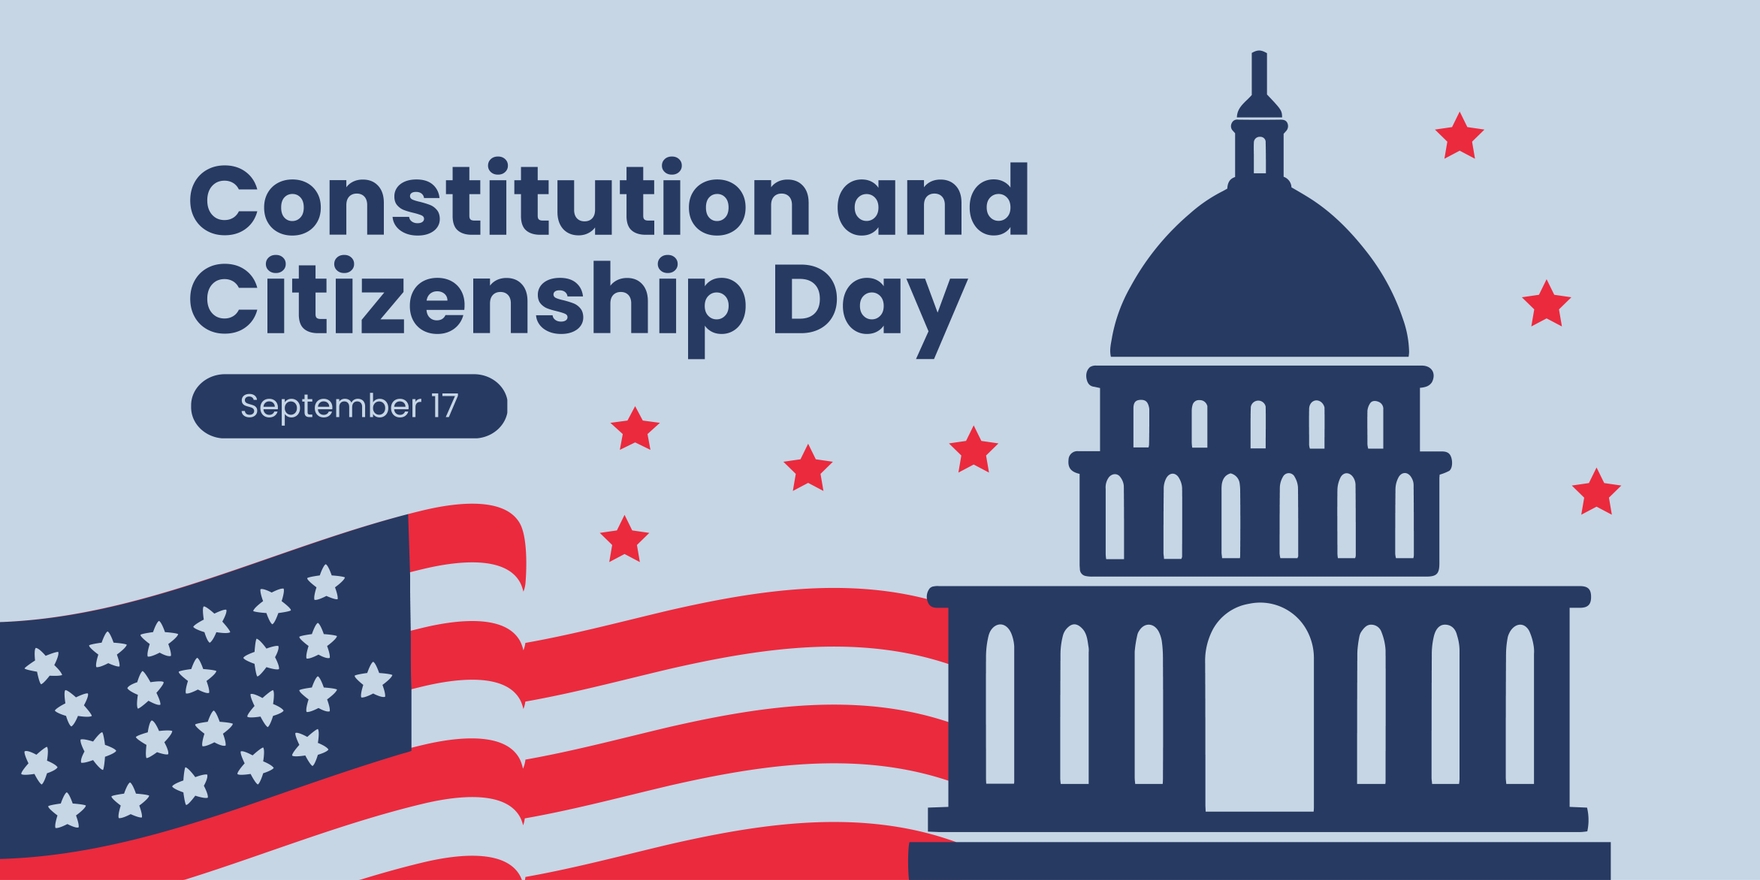 Constitution and Citizenship Day Banner in Illustrator, PSD, EPS, SVG, JPG, PNG